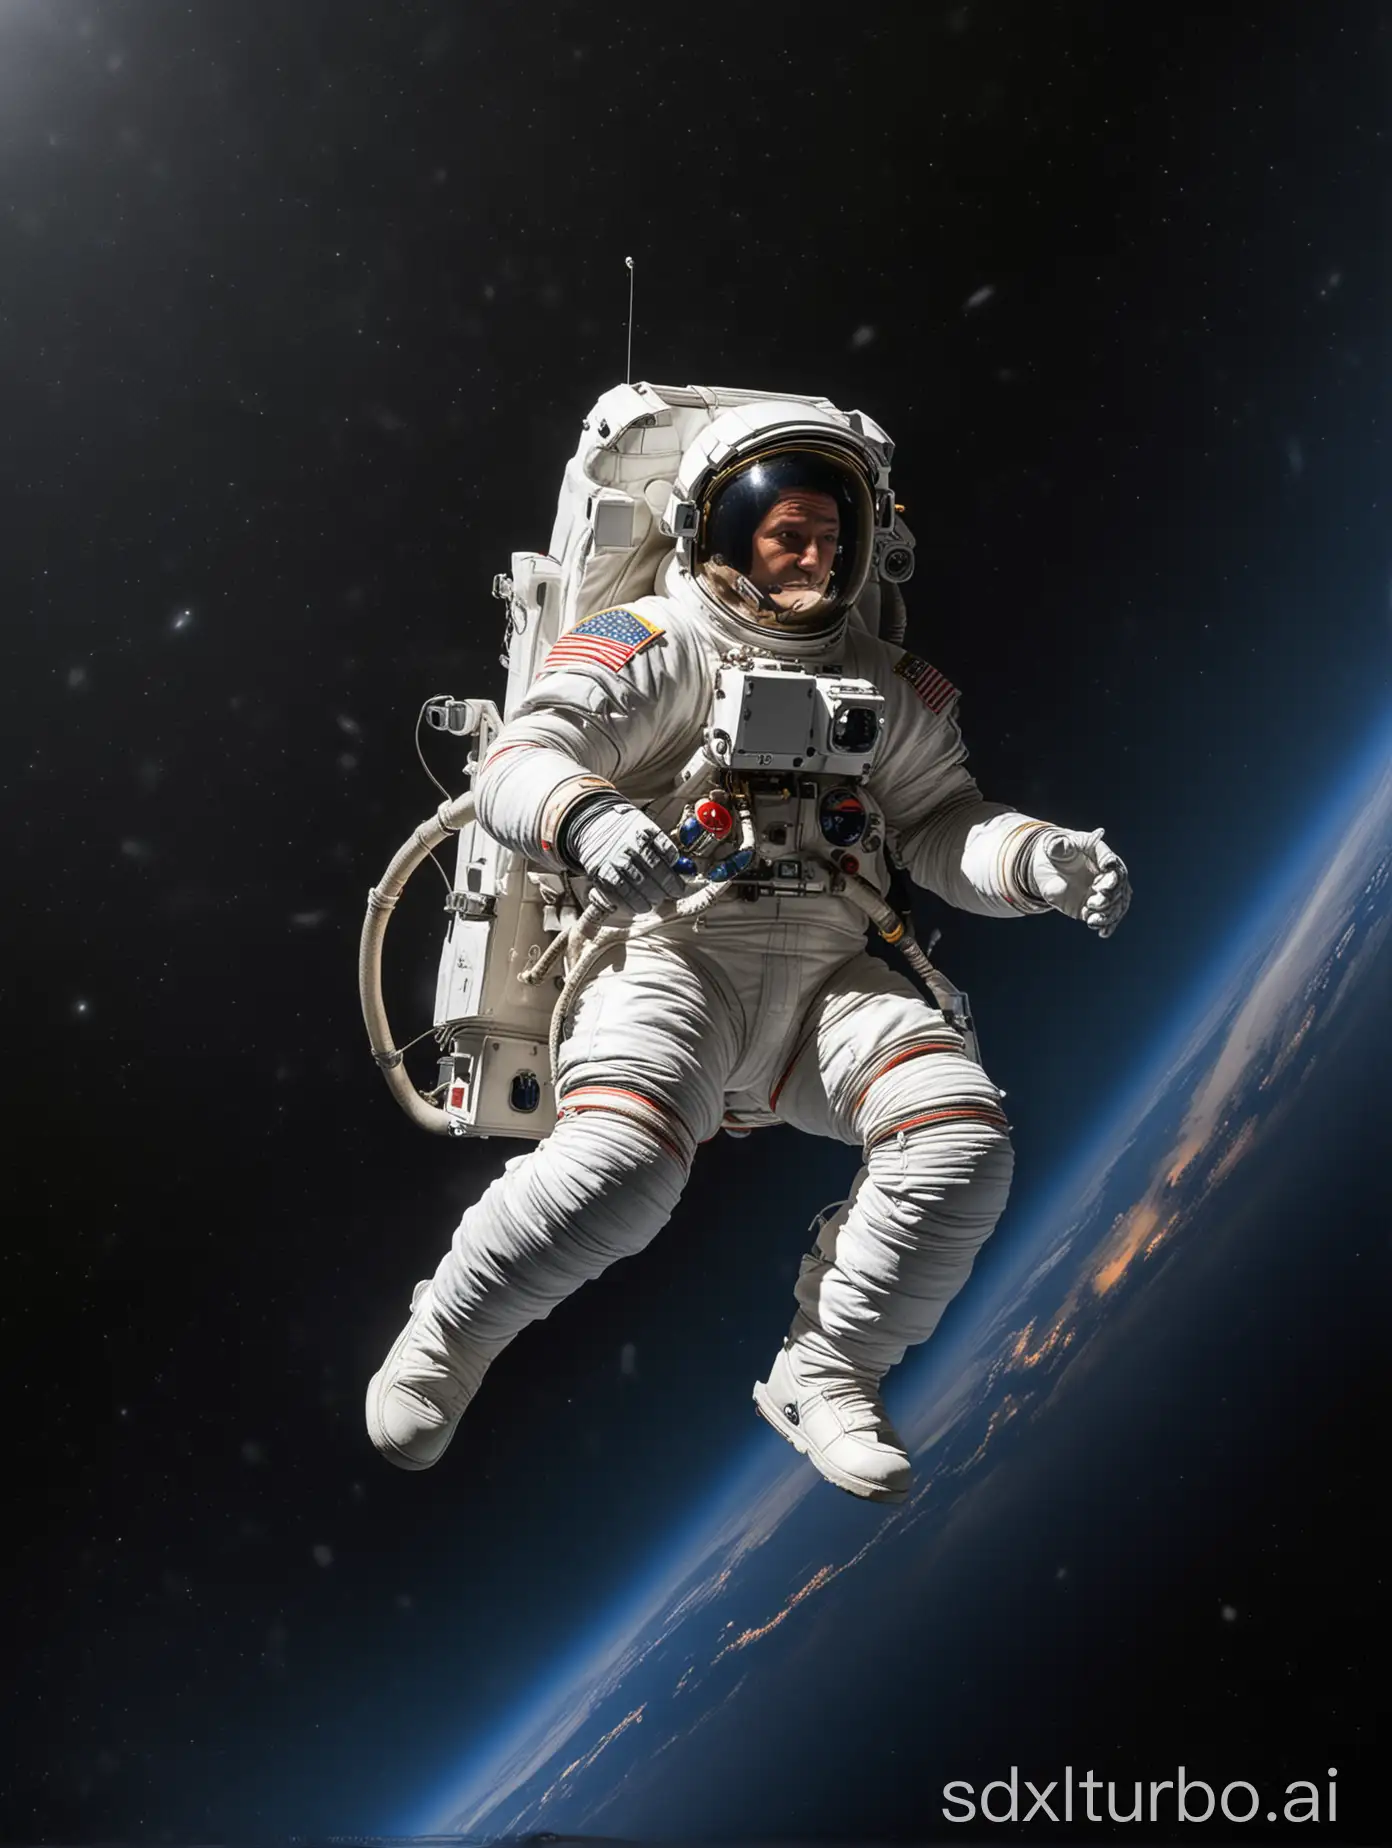 a Spanish astronaut flying through space
propelled by a propulsion backpack